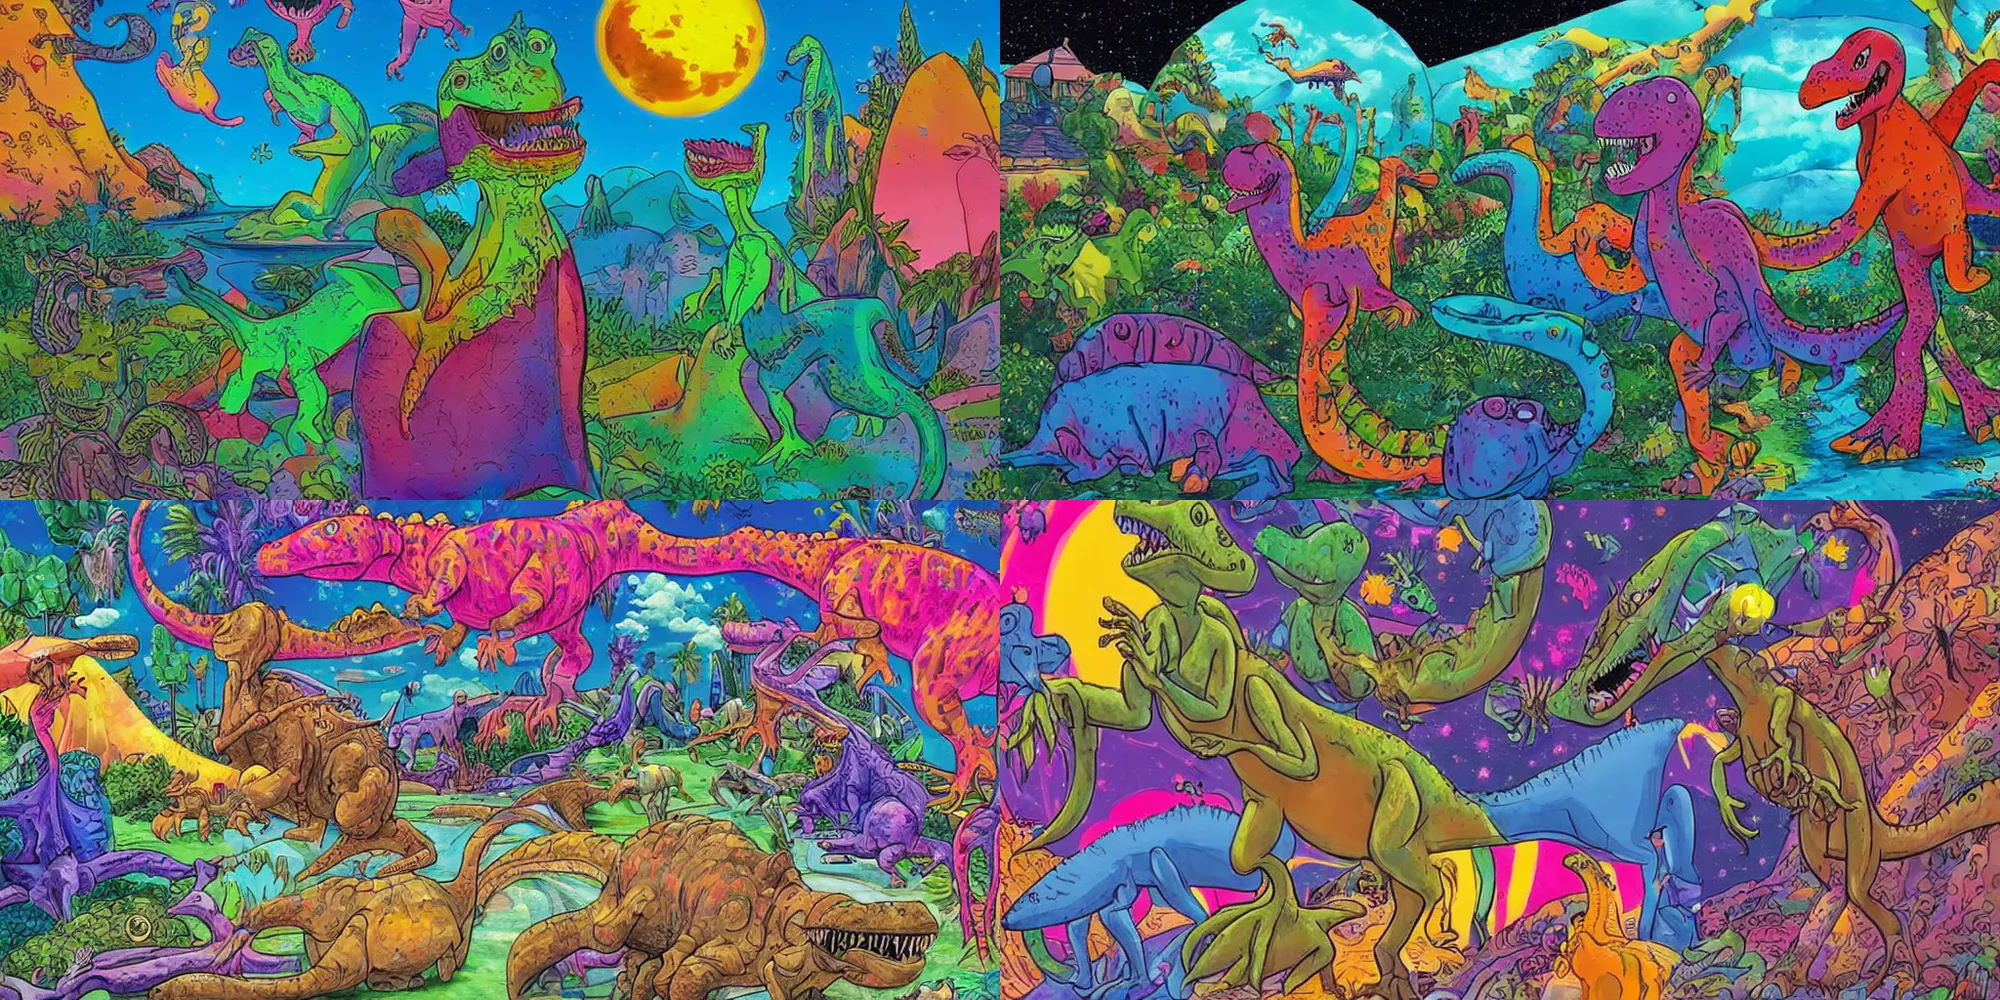 Prompt: michael garfield expectorates yet another gooey vaguely confusion of backwardlooking dinosaur figure, ground with entirely too much autodidactic lisa frank and not nearly enough art school, hyperdetailed posthuman scifi landscape, extraneous ufos